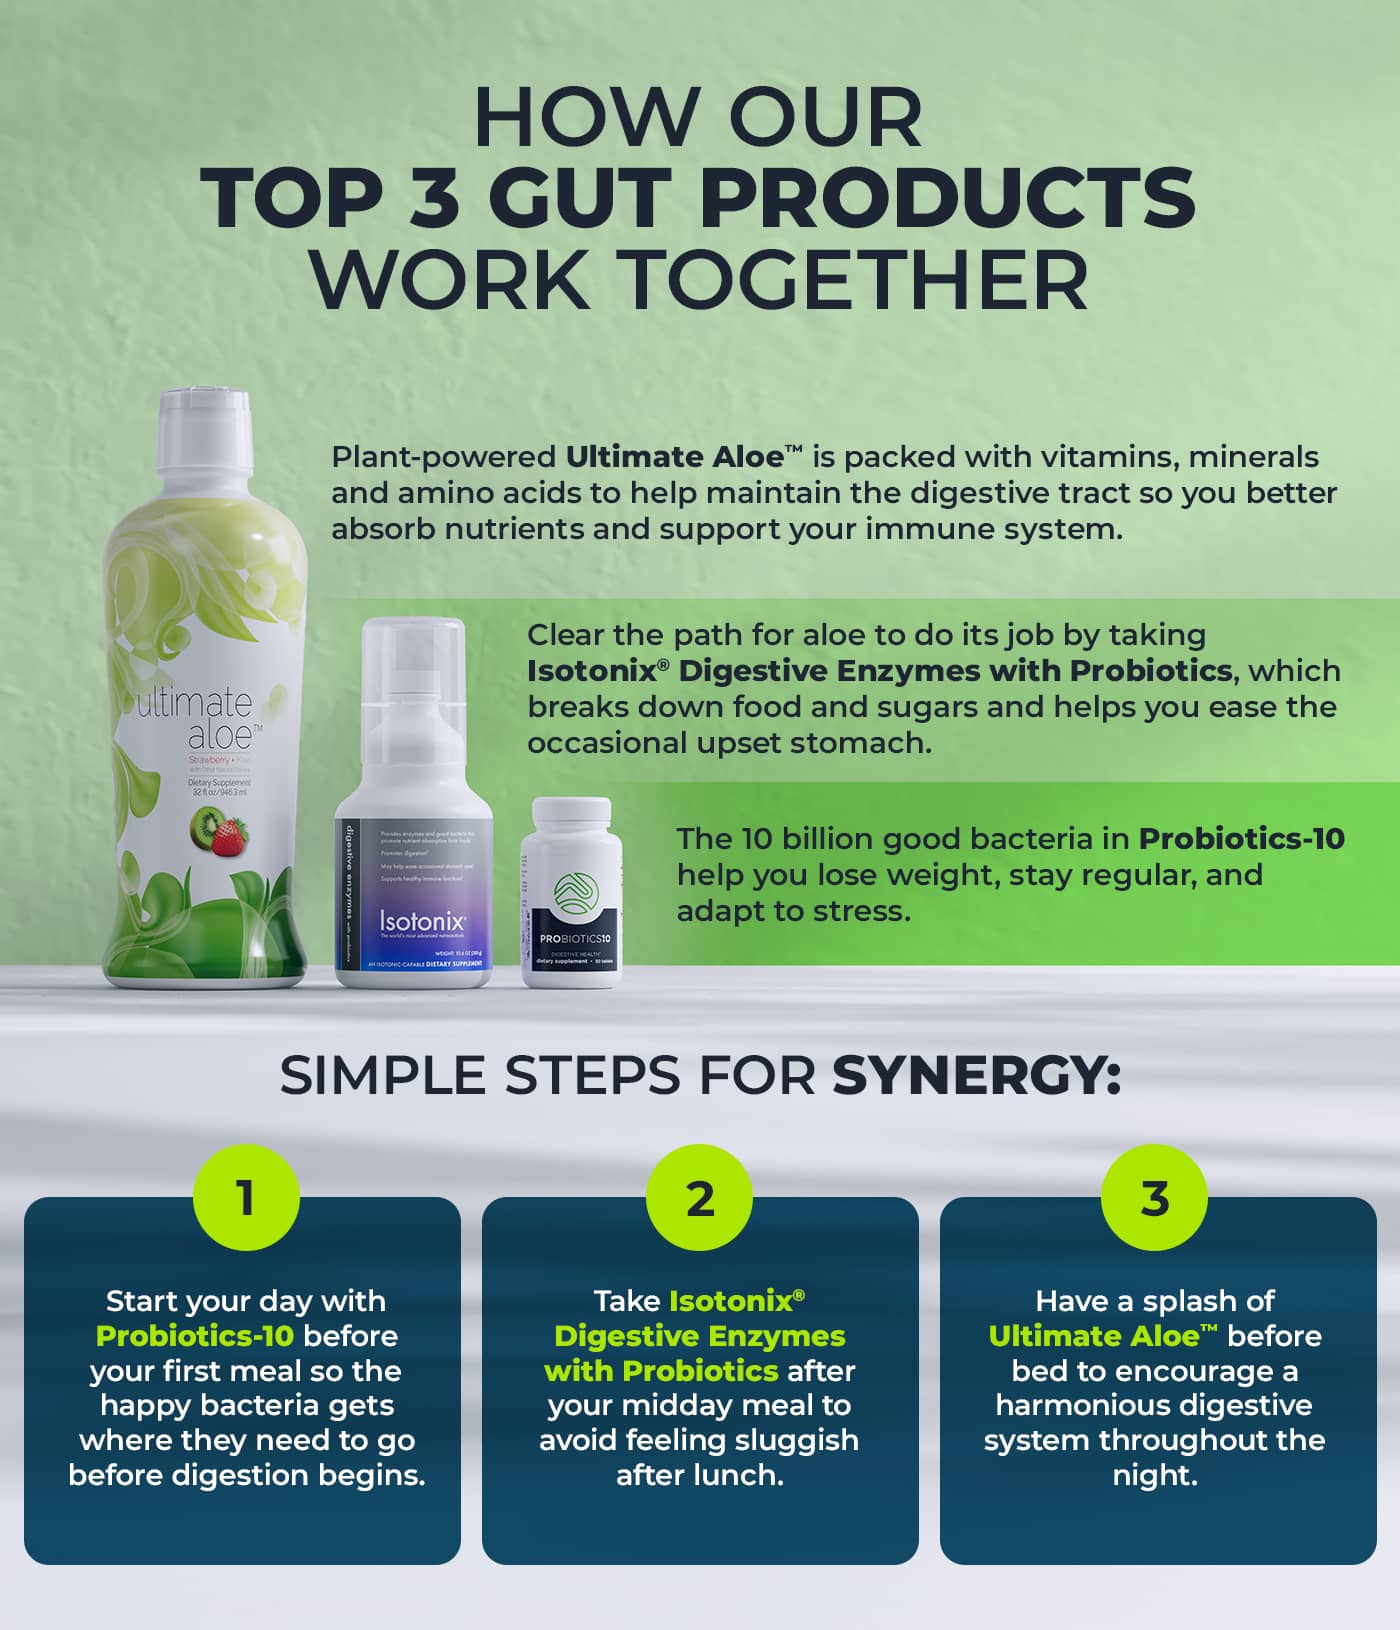 How Isotonix® Digestive Enzymes with Probiotics Benefits You